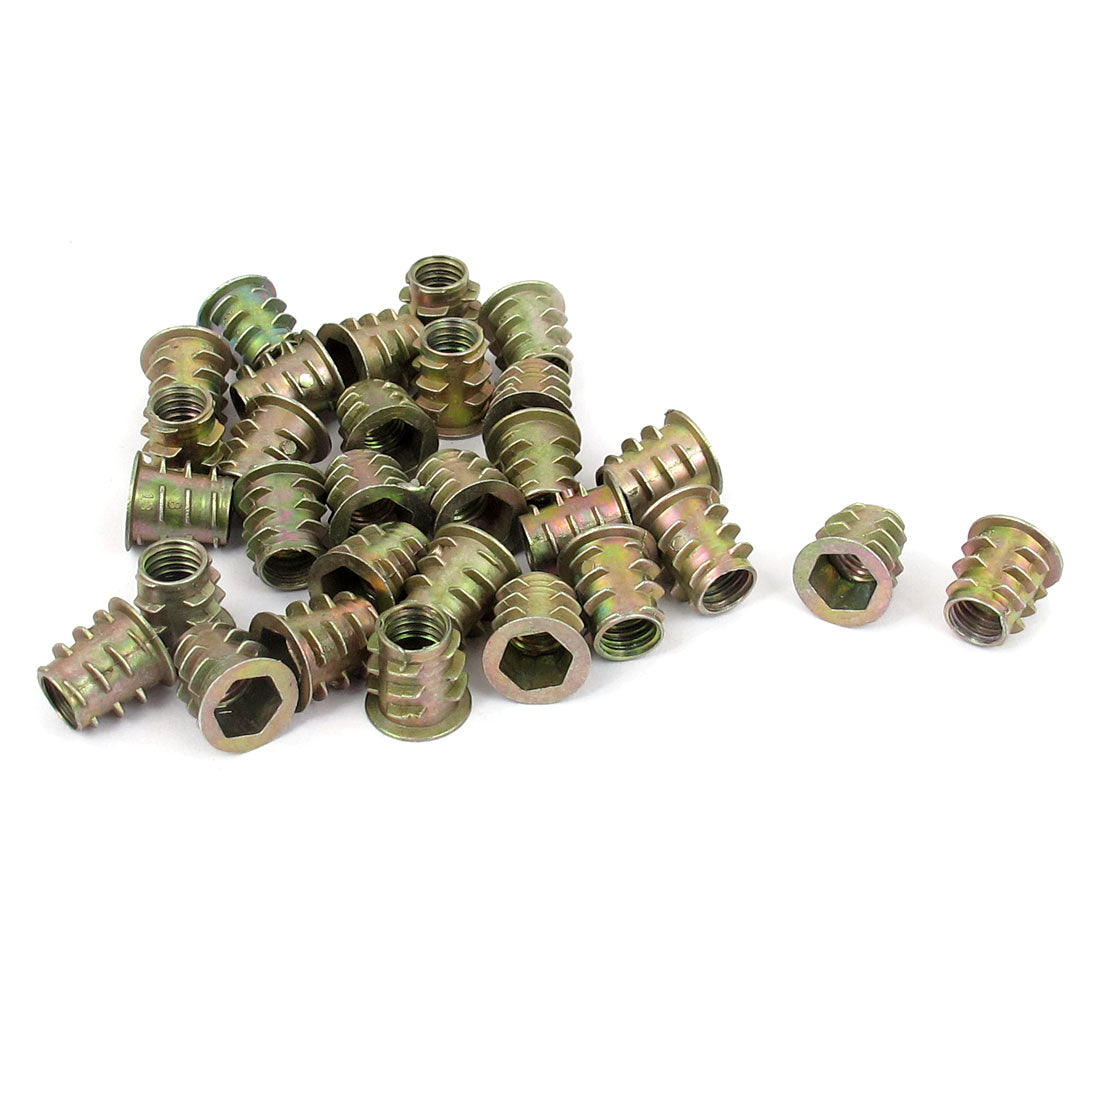 uxcell Uxcell 30 Pcs M6x10mm Zinc Plated Hex Socket Screw in Thread Insert Nut for Wood